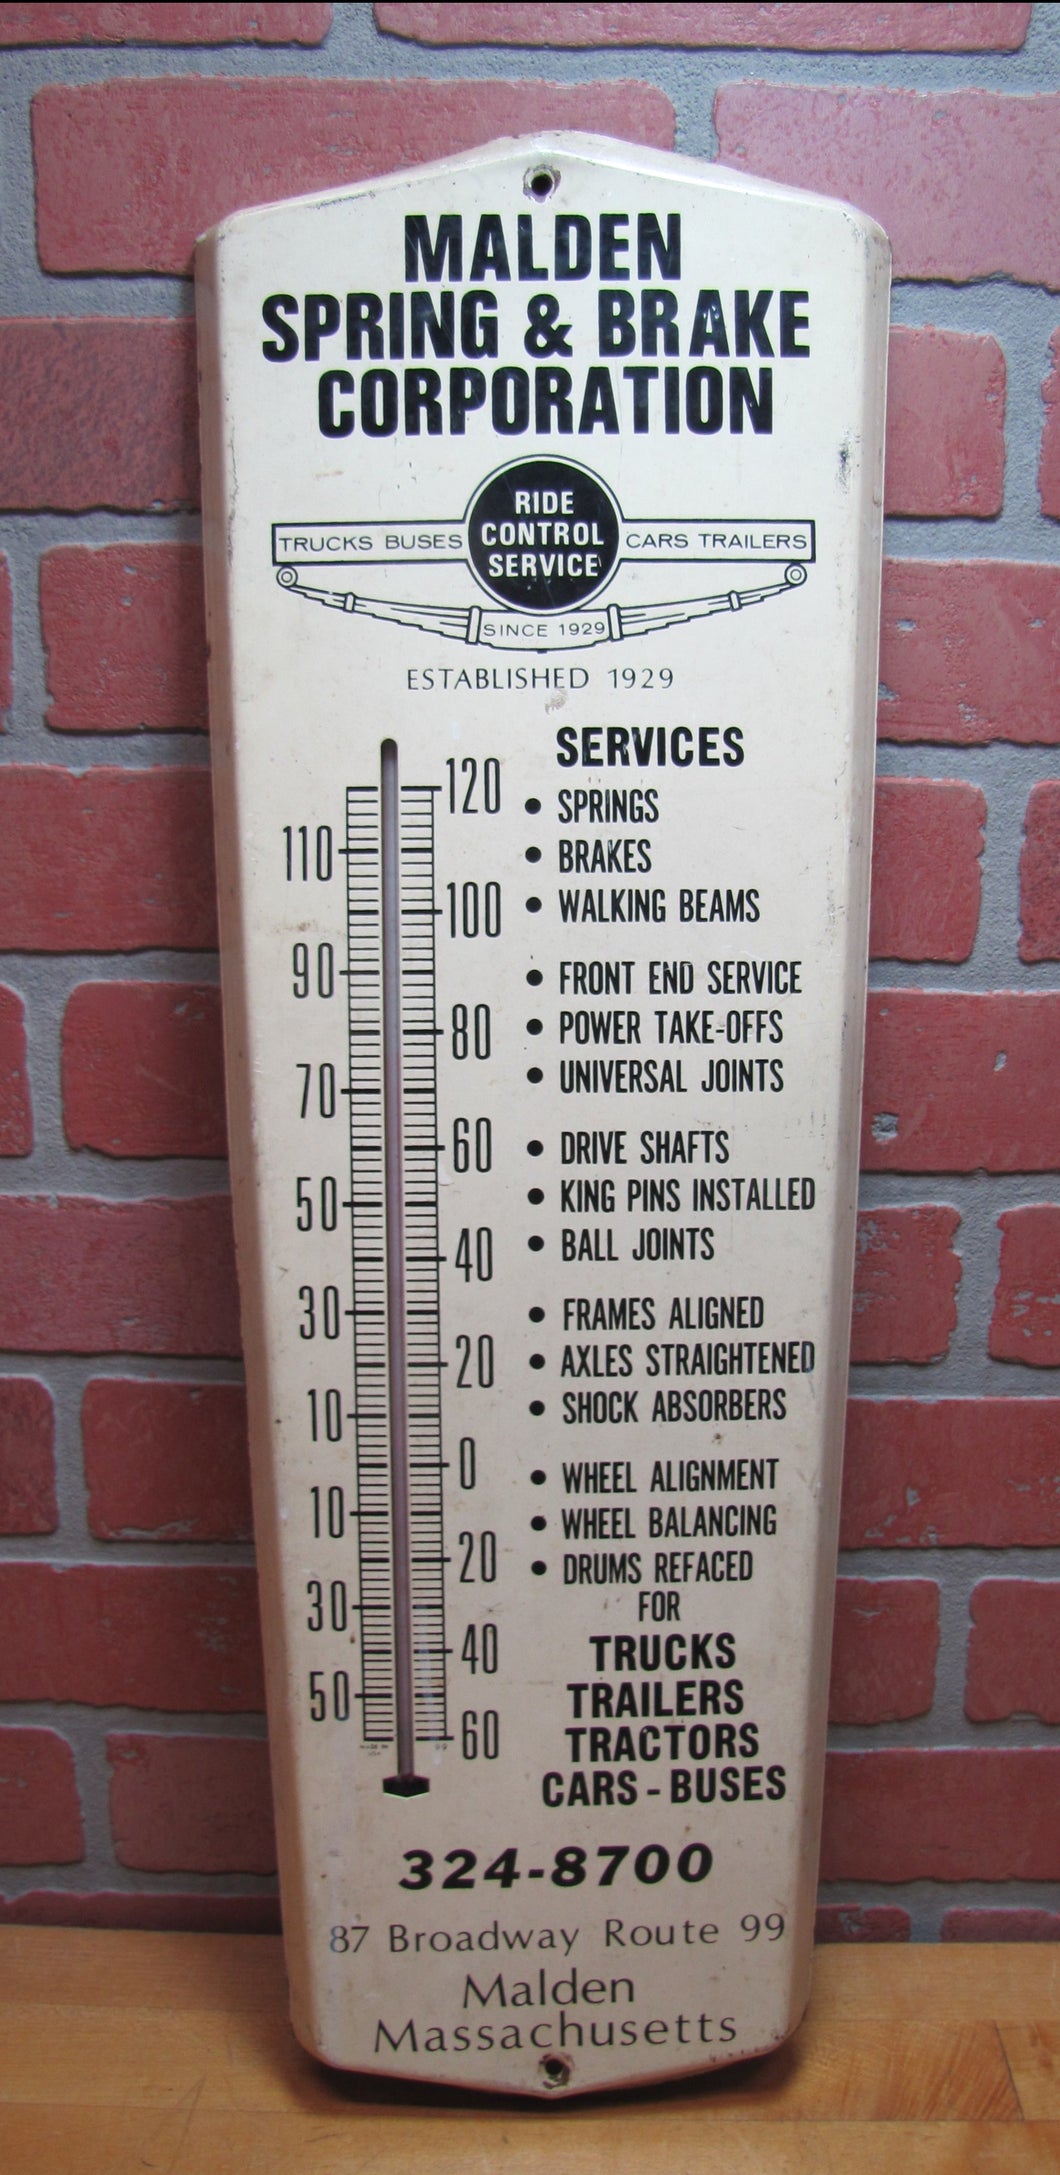 MALDEN SPRING & BRAKE est1929 Old Advertising Thermometer Mass TRUCKS BUSES CARS TRAILERS Made in USA